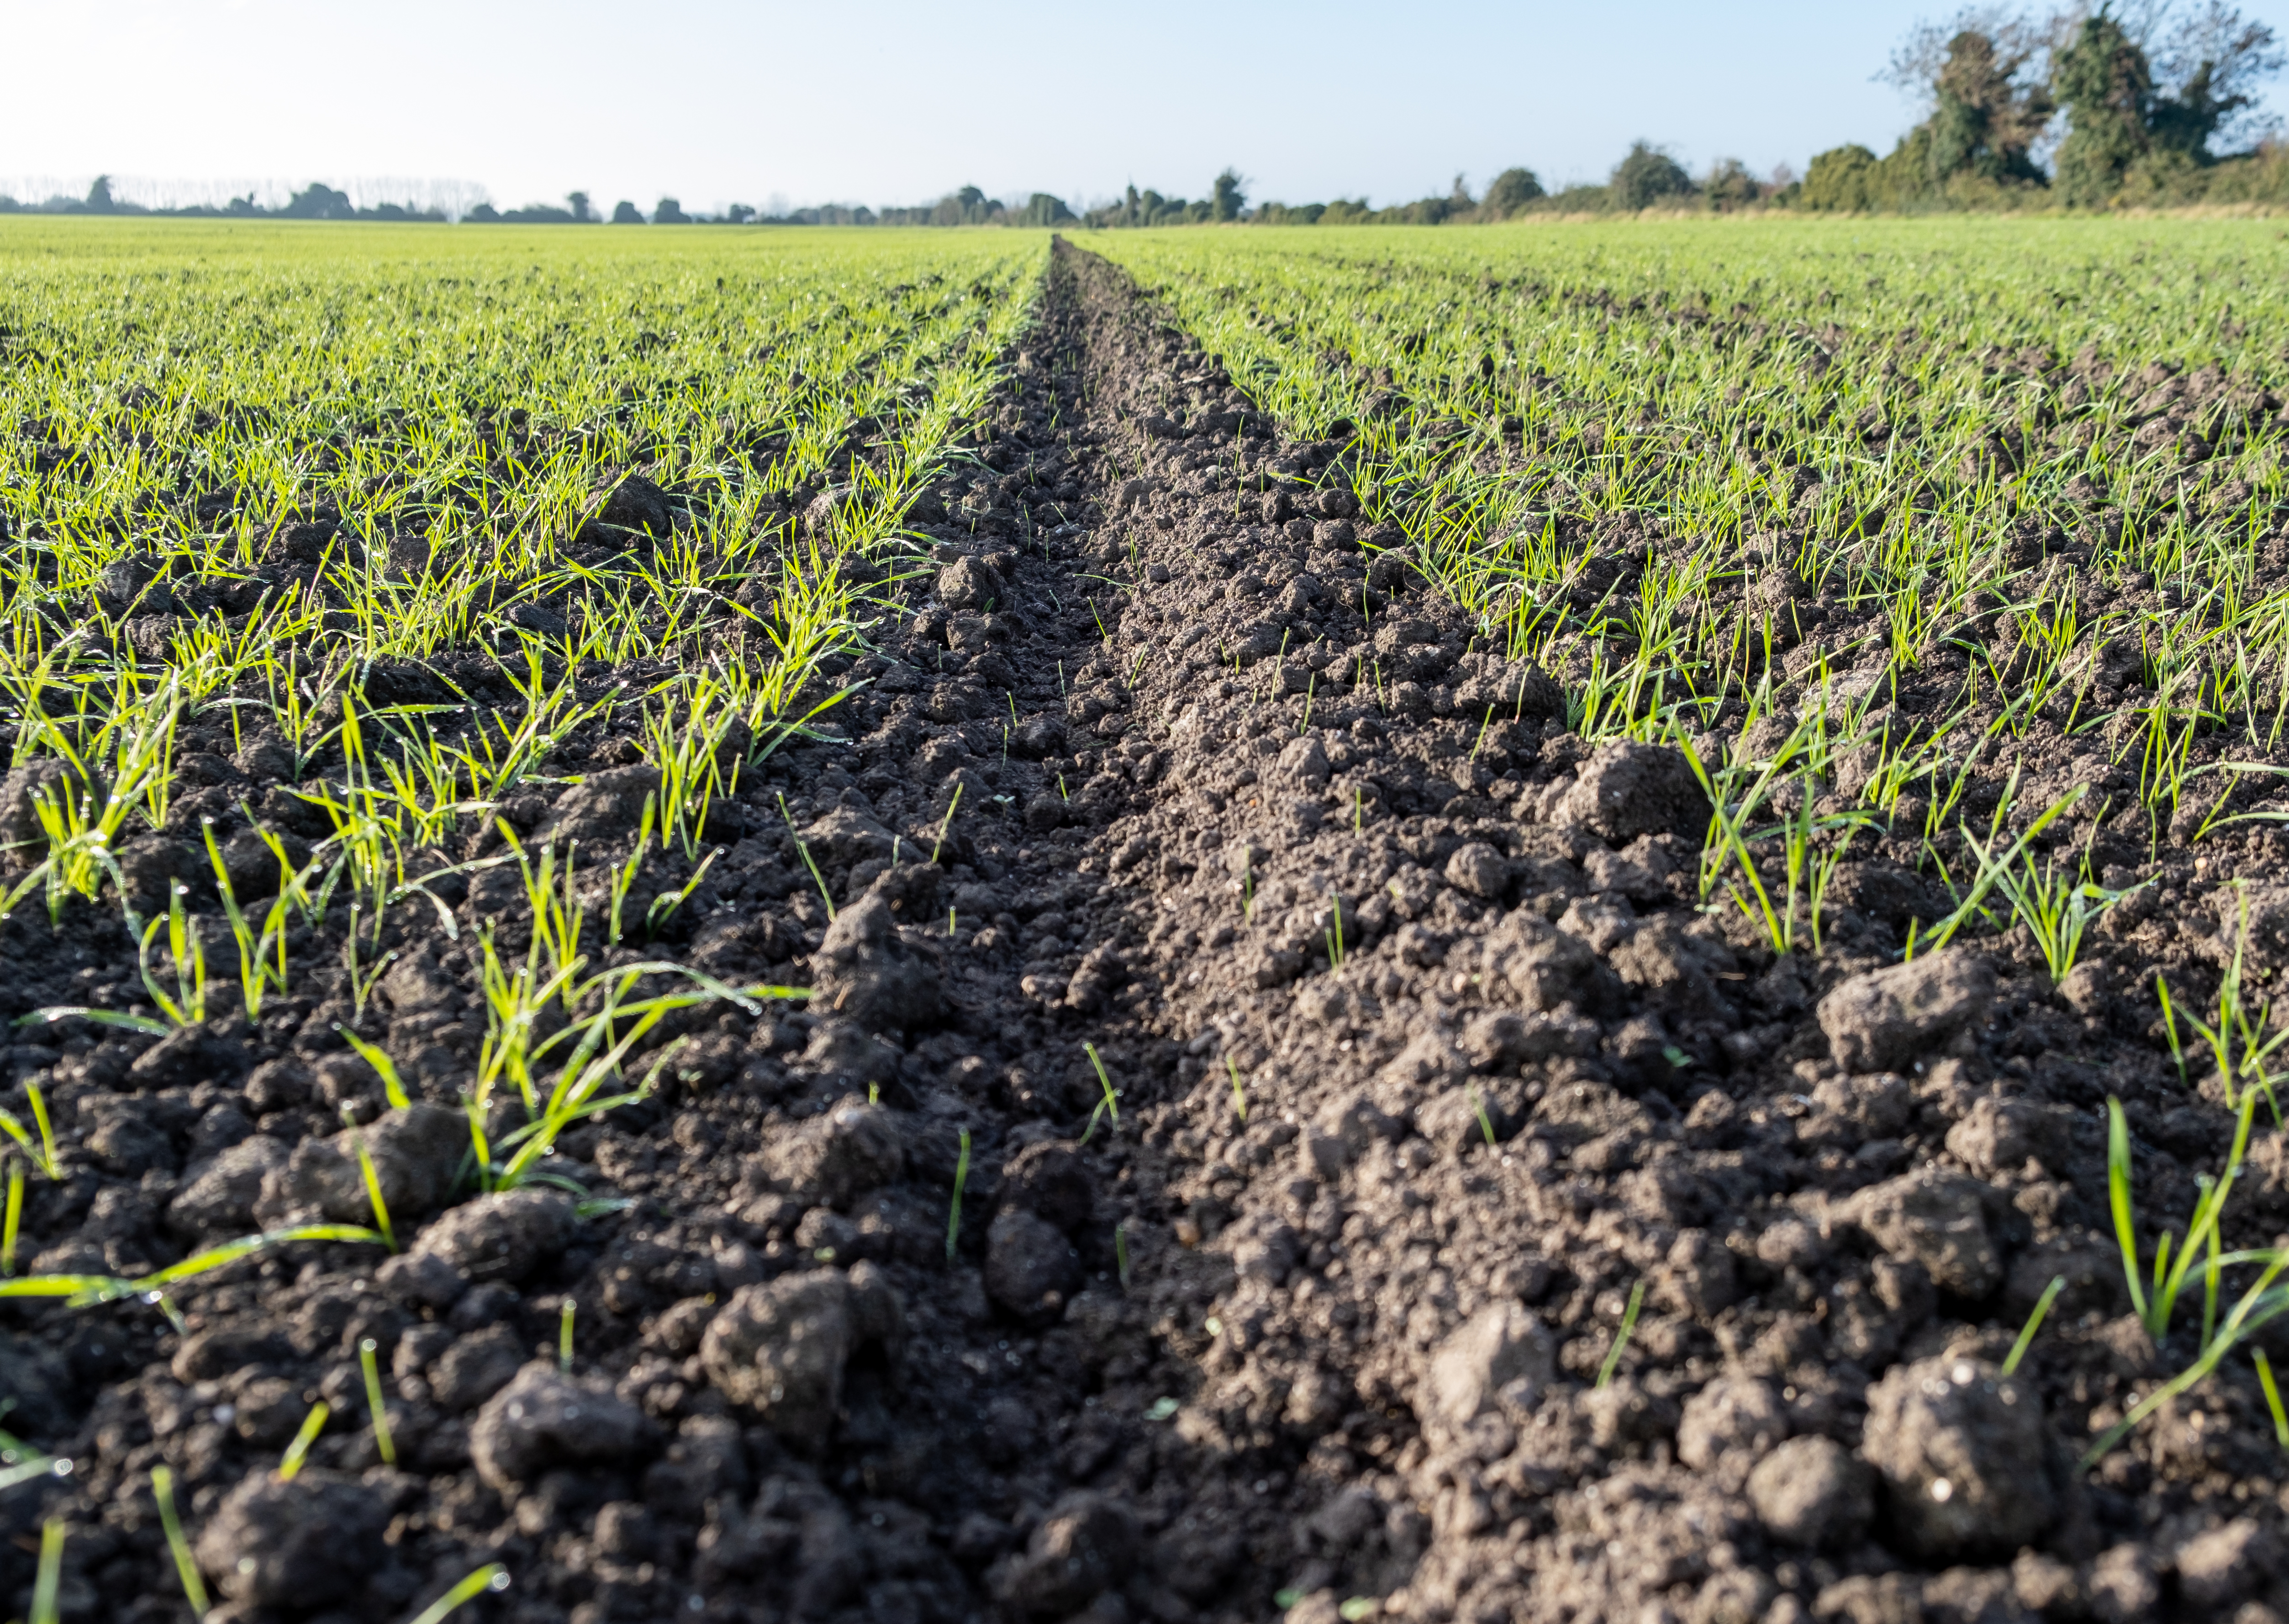 Restricting the growth of blackgrass